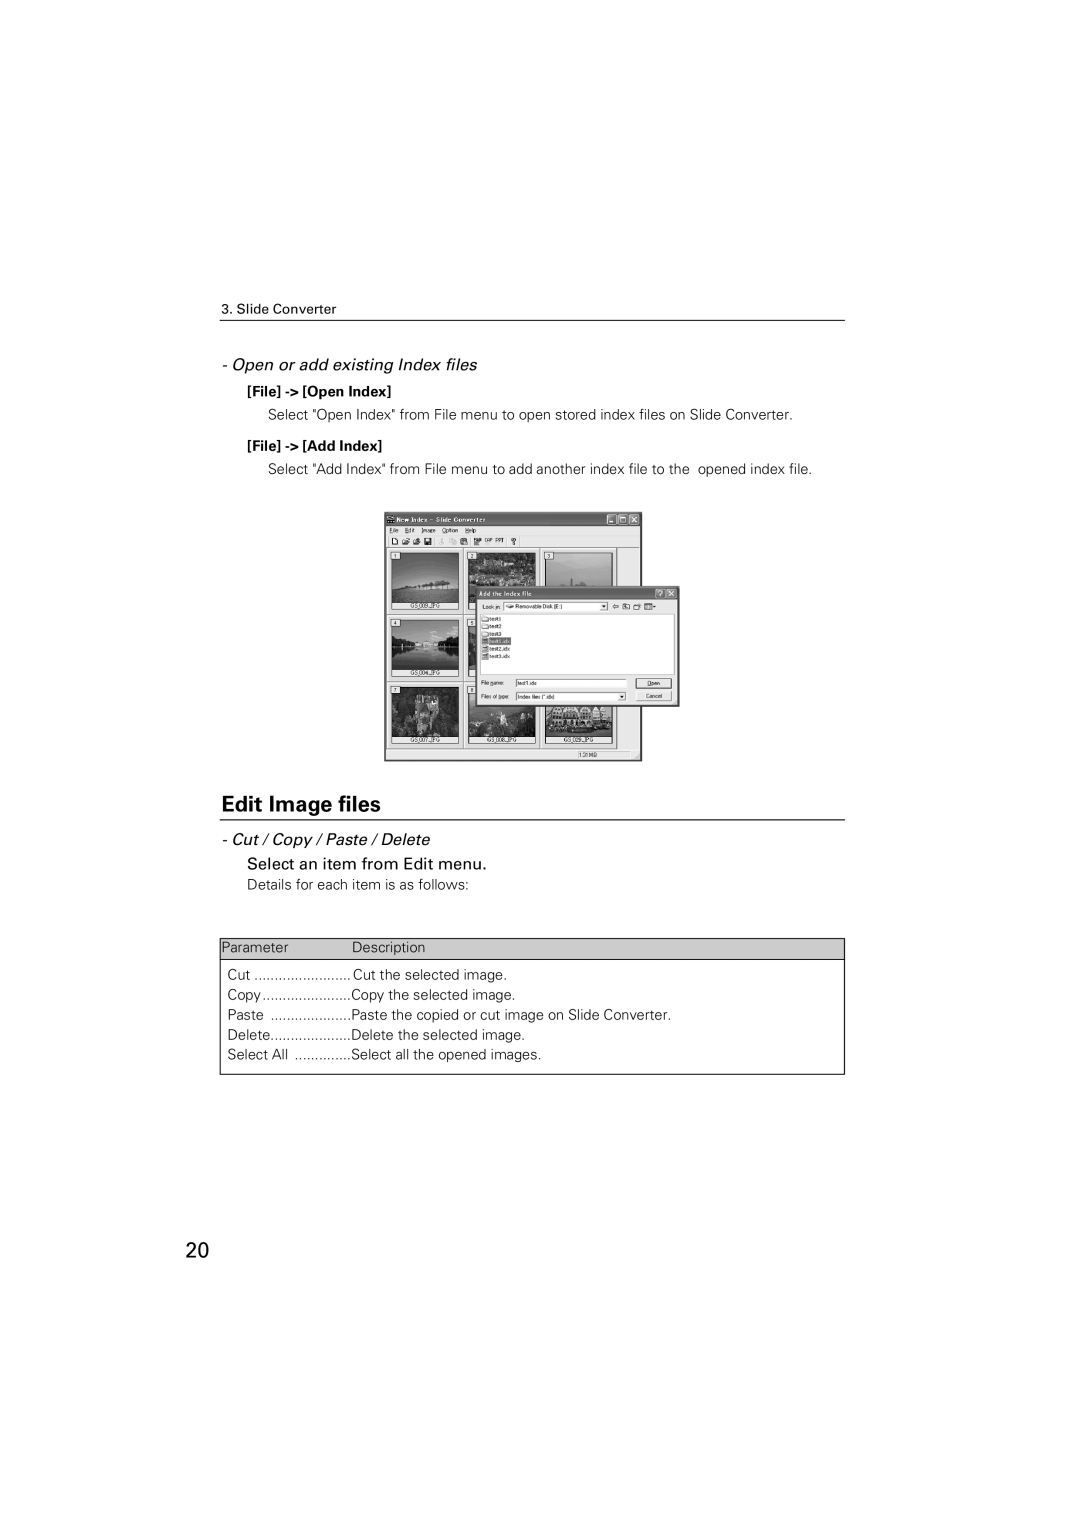 Sanyo POA-USB02 owner manual Edit Image files, Open or add existing Index files, Cut / Copy / Paste / Delete 